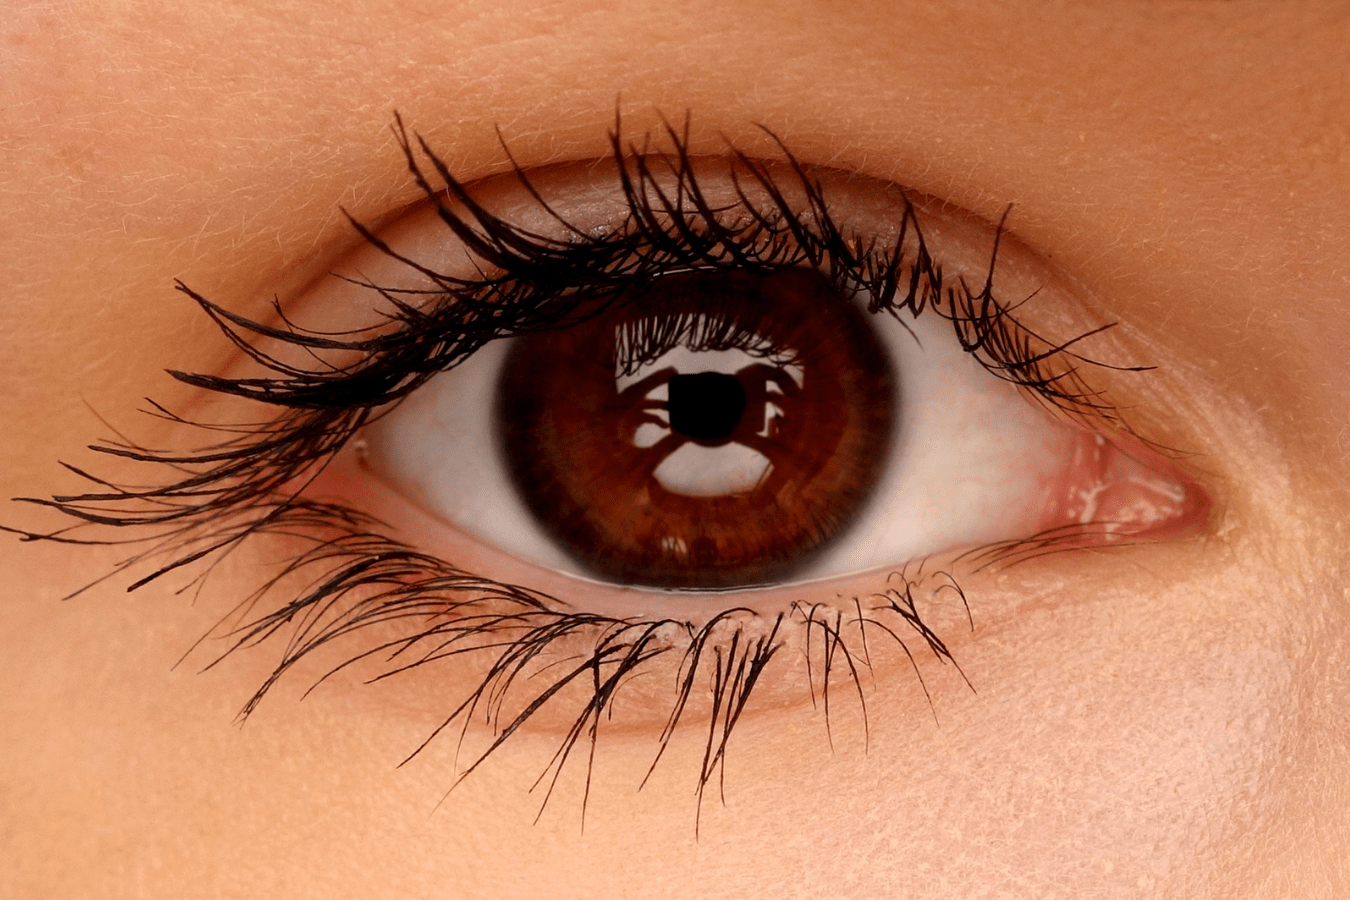 Dream About Eyes: What Does it Mean?